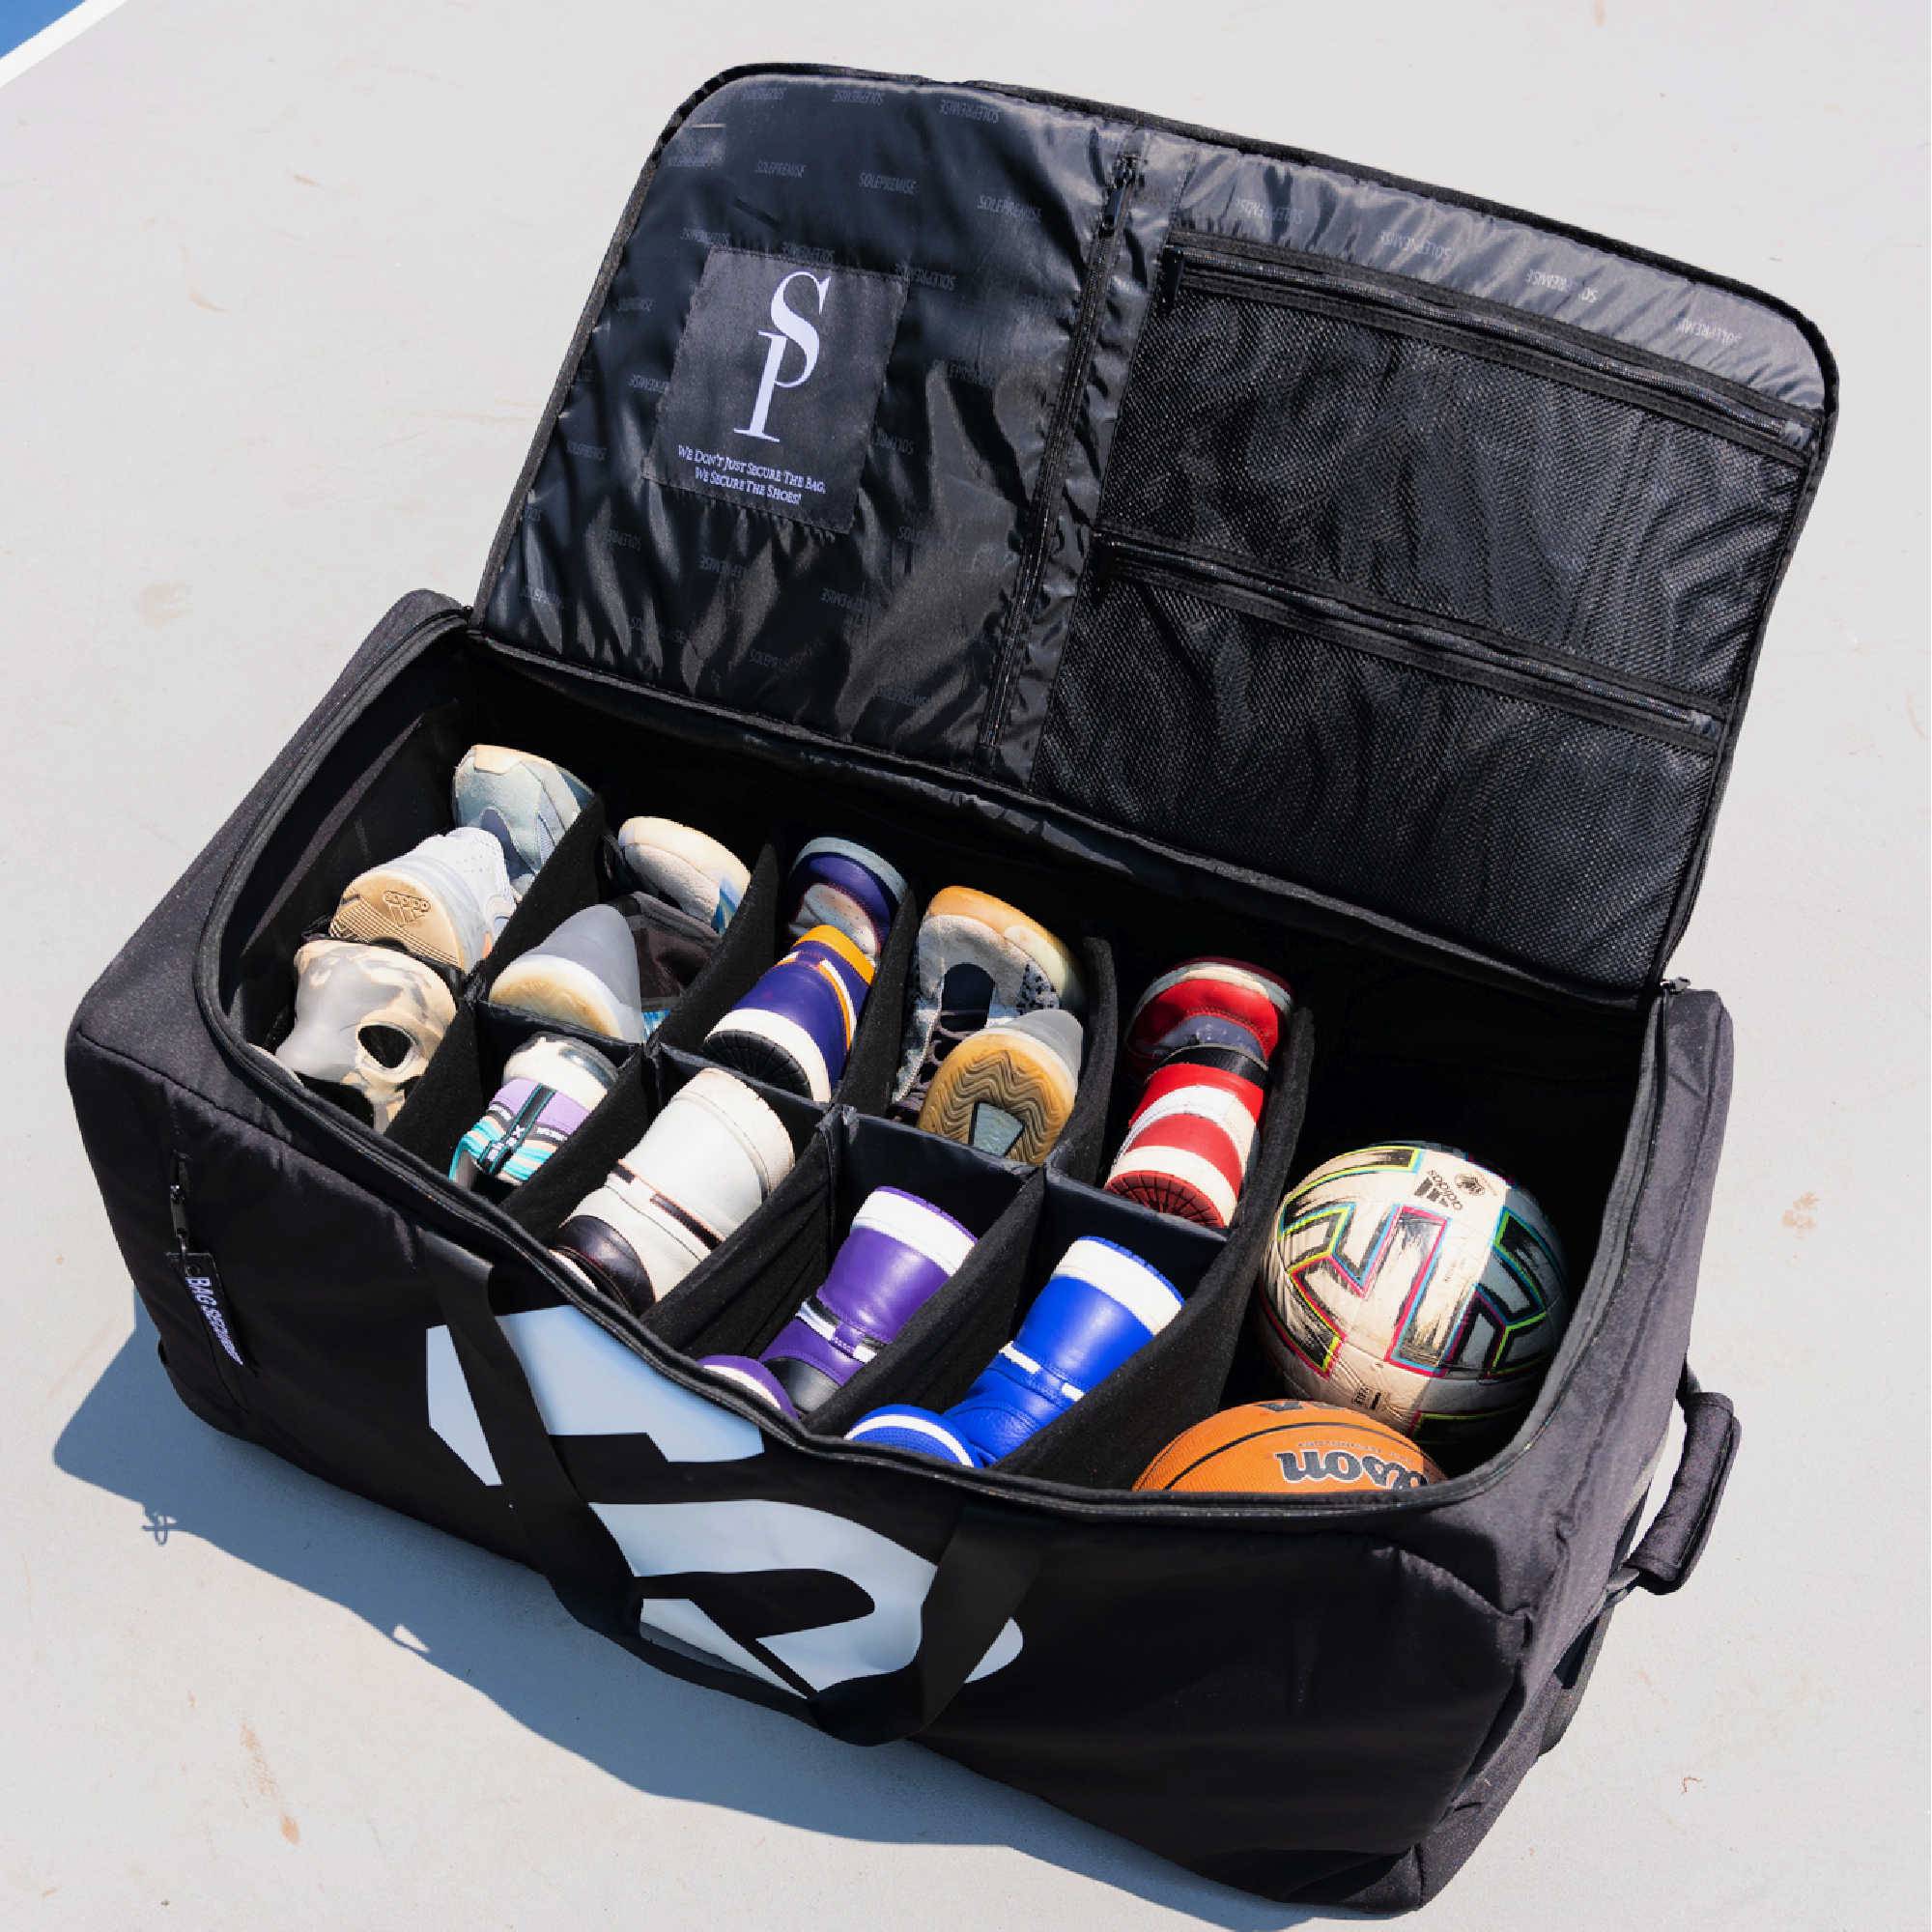 Sports Equipment Carrier With Wheels (Holds 18-20 Pairs of Shoes)